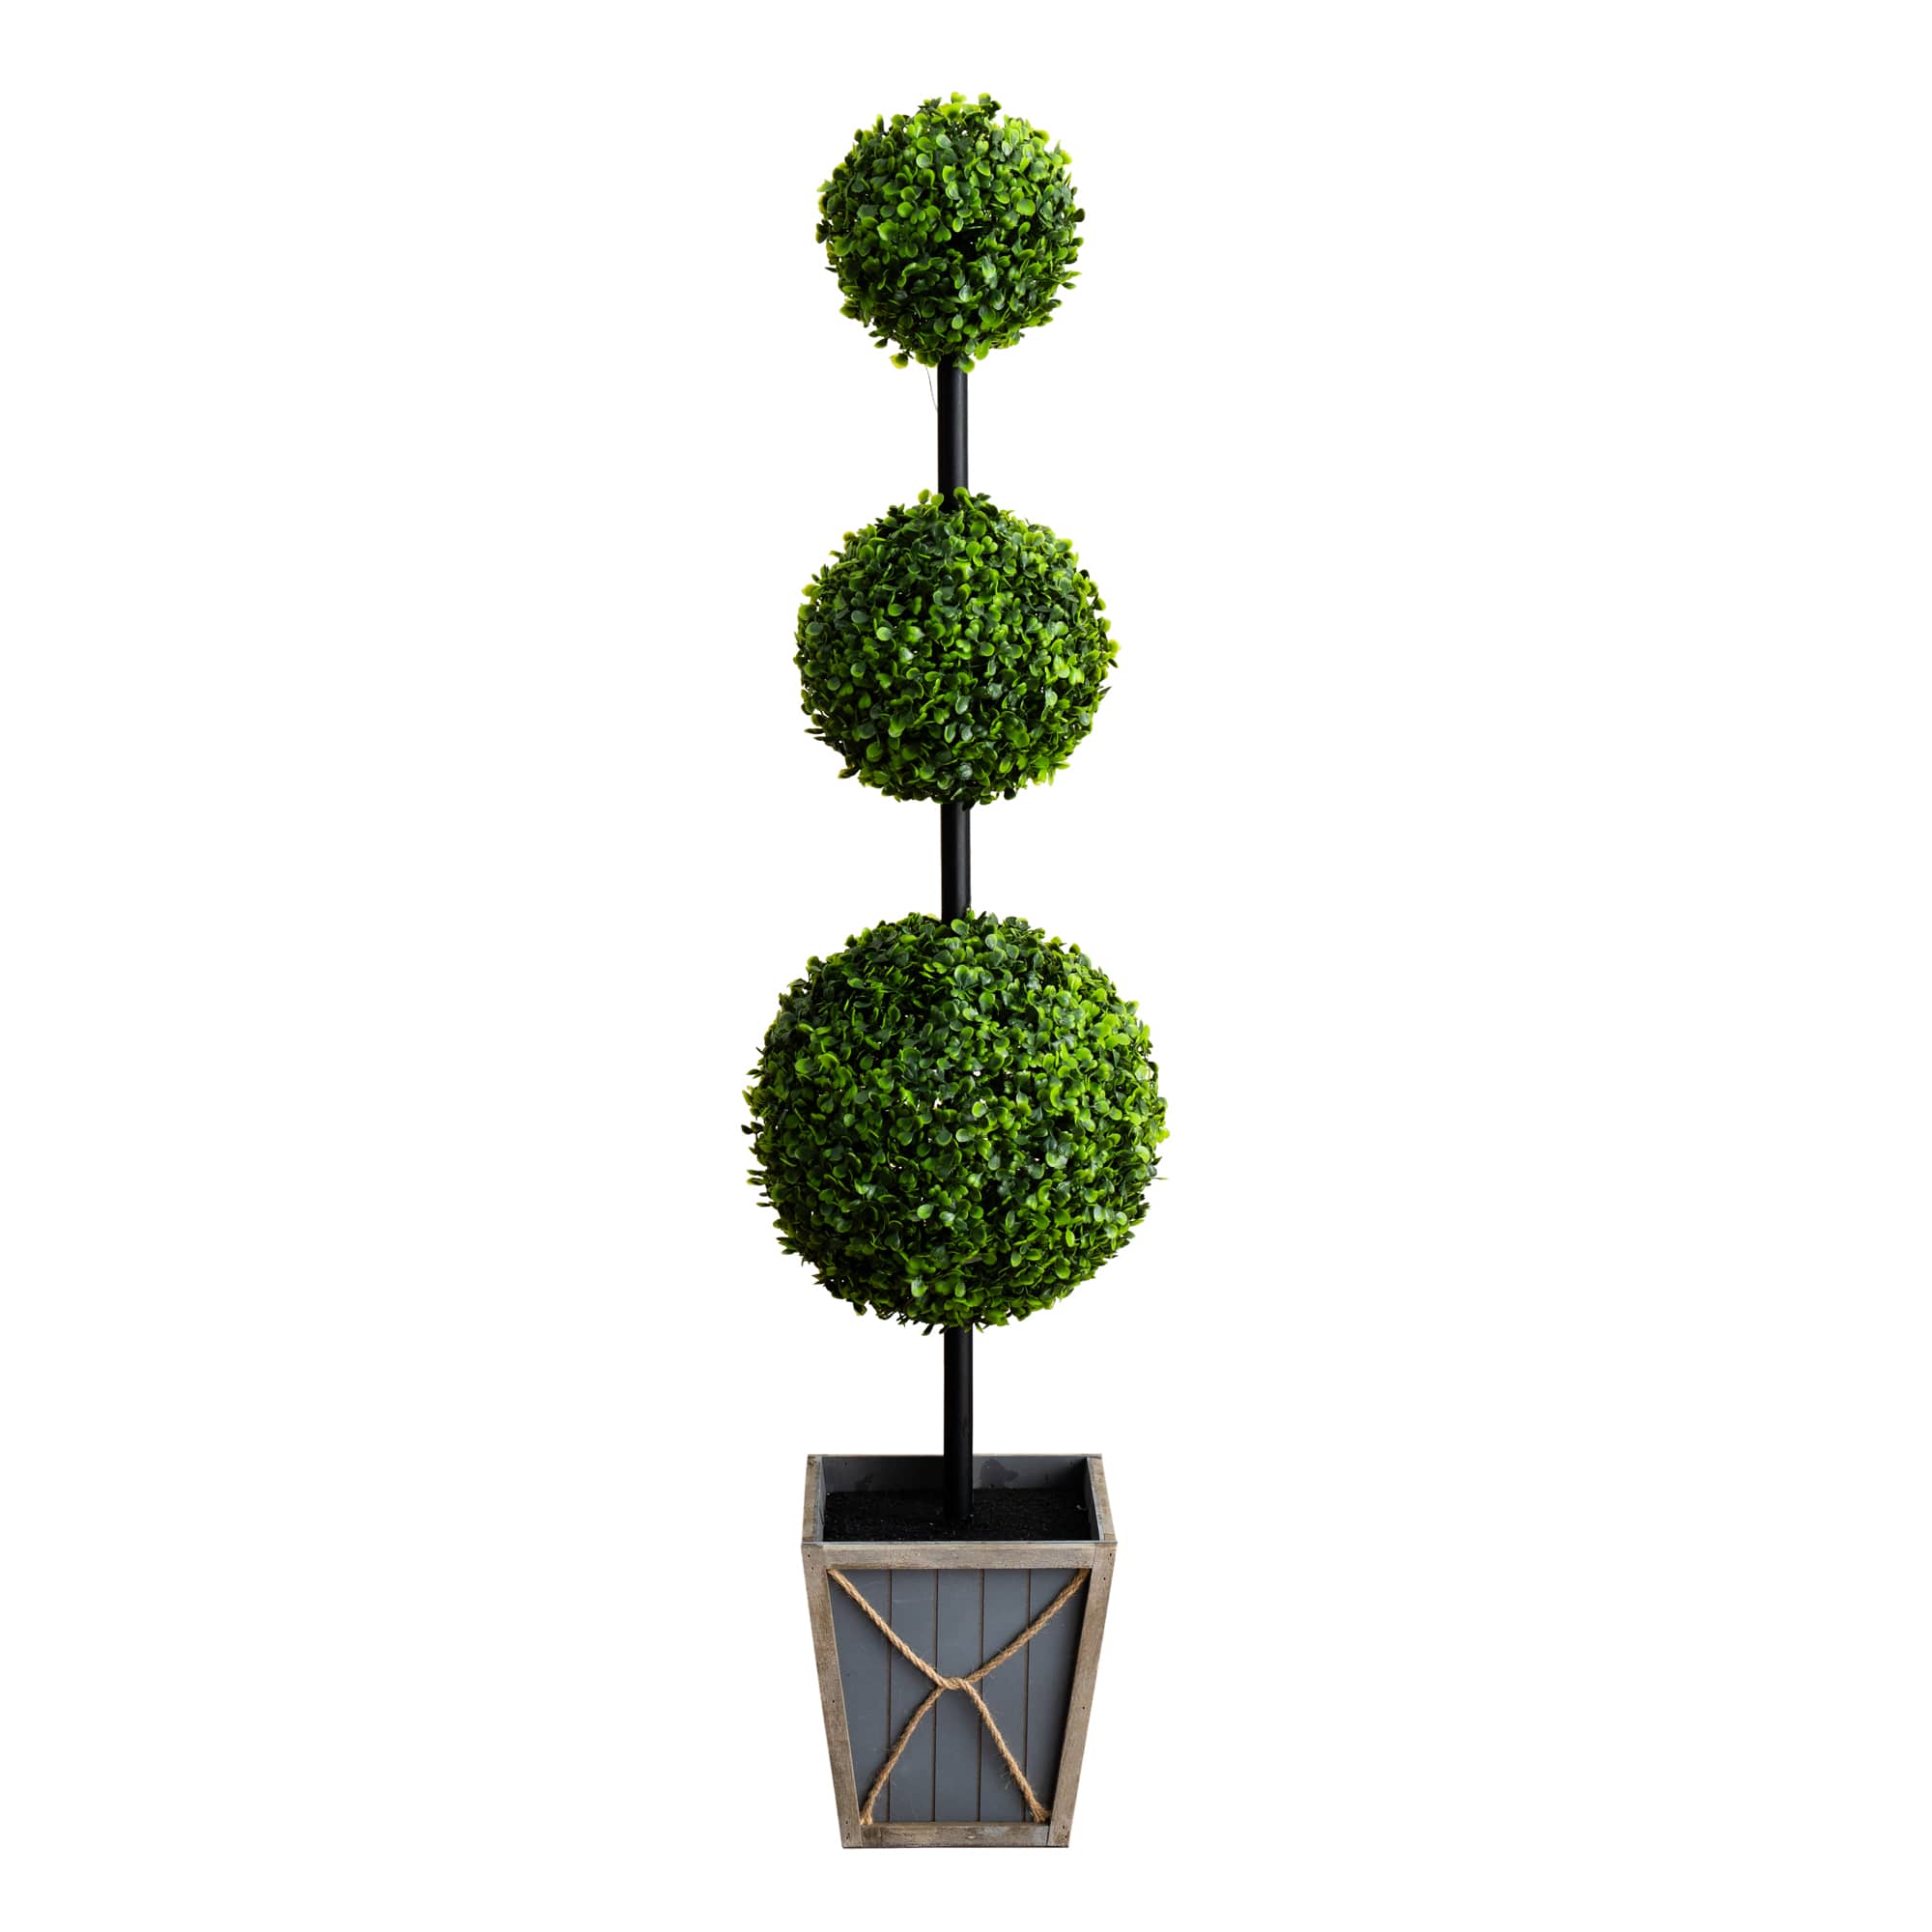 4ft. LED UV Resistant Triple Ball Boxwood Topiary in Decorative Planter